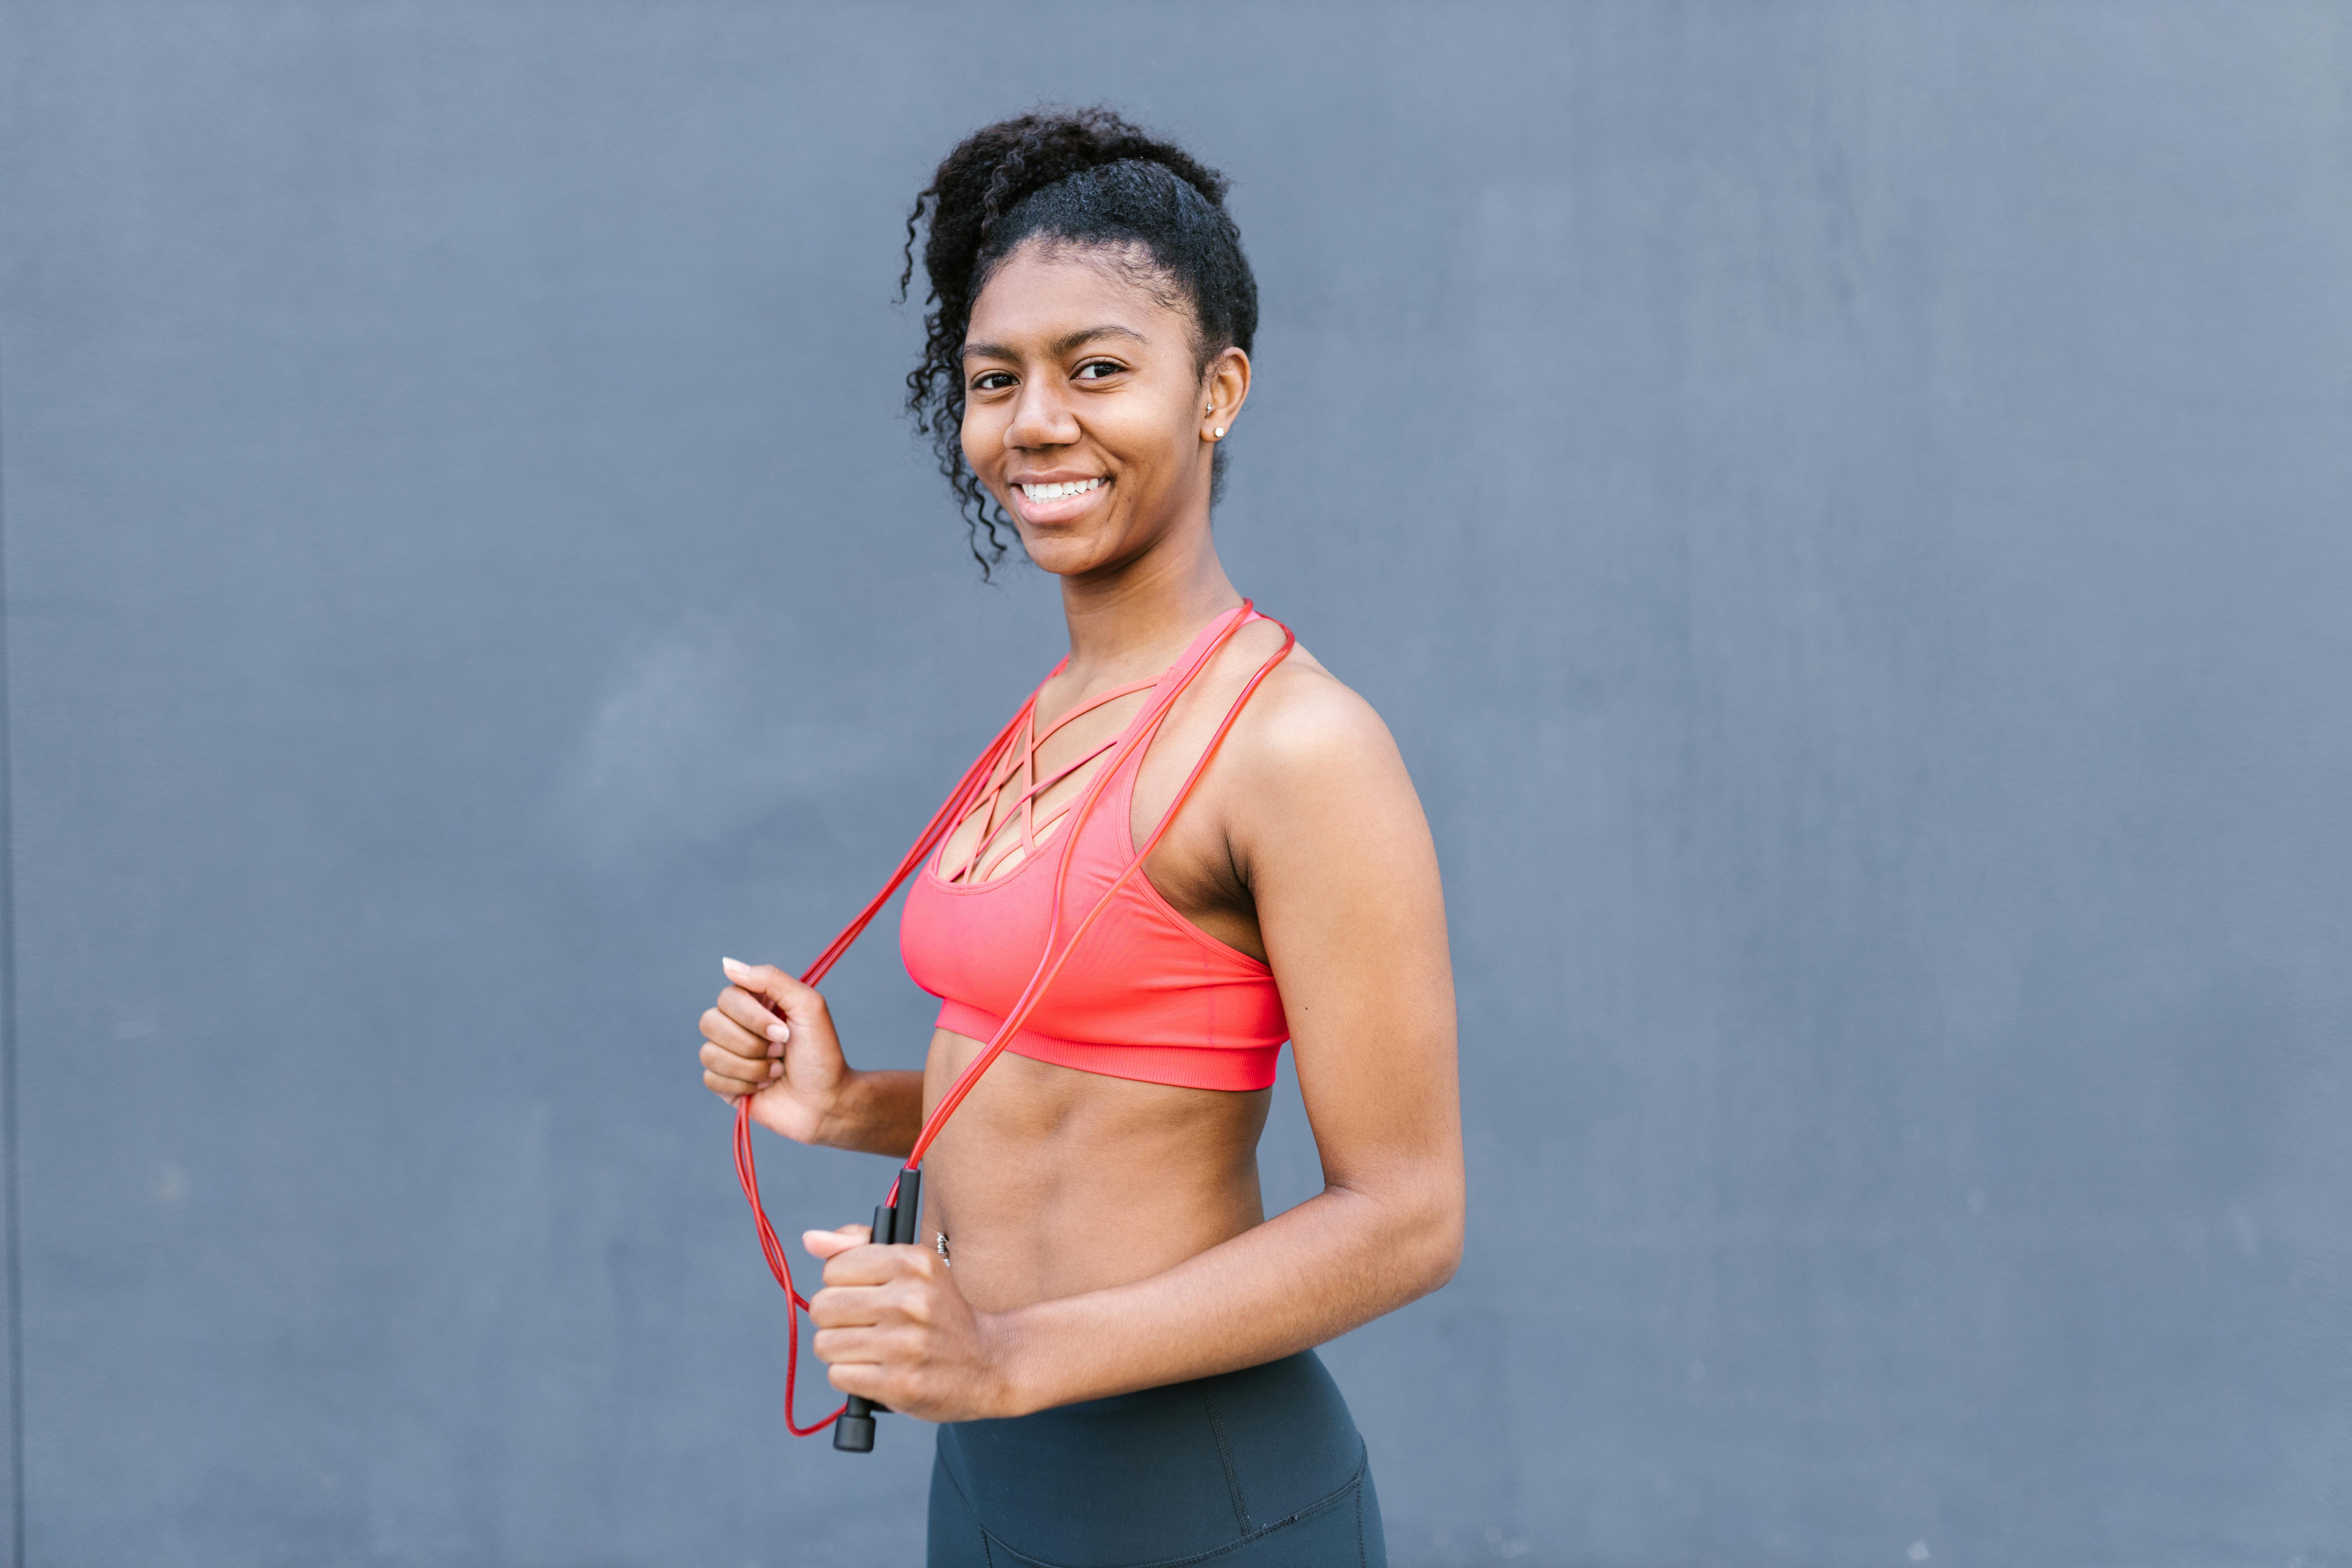 Woman Wearing Red Sports Bra Holding Skipping Ropes Smiling · Free Stock  Photo